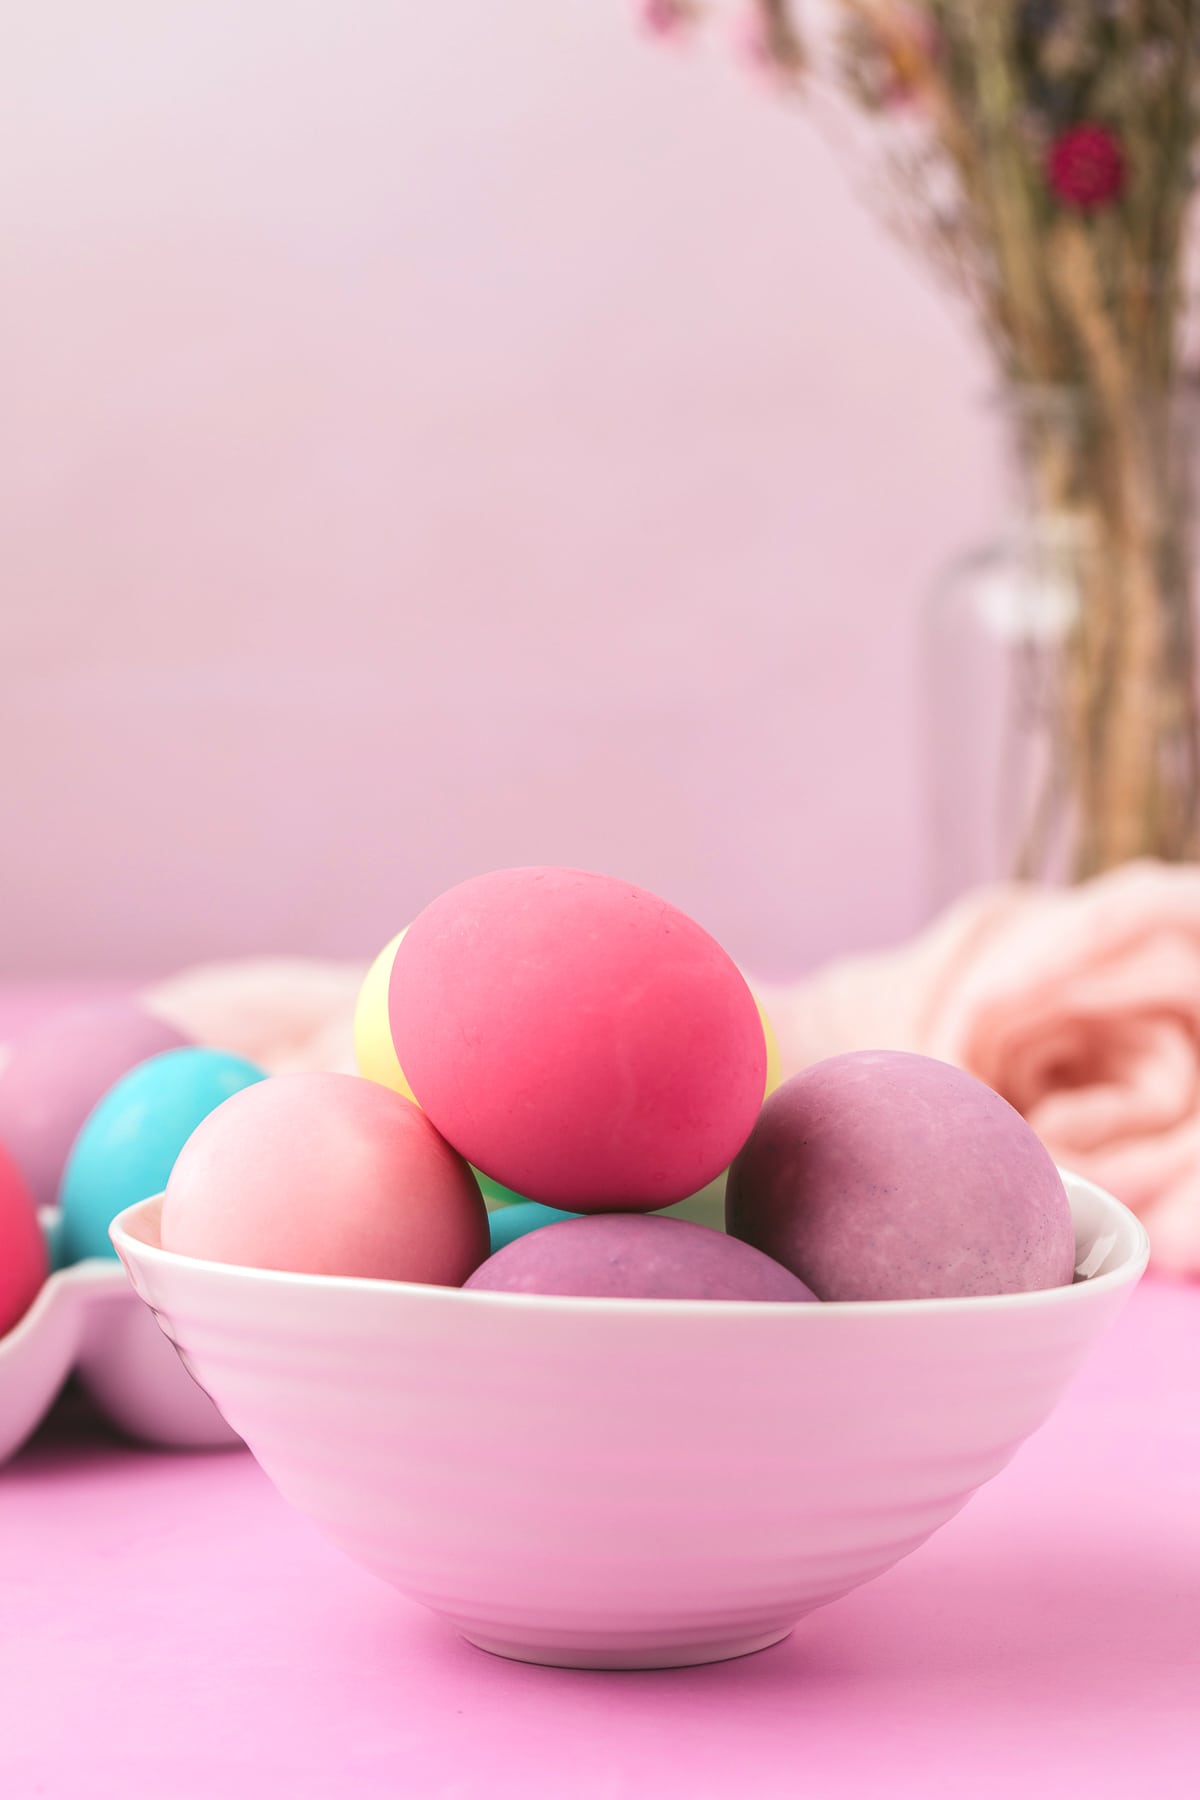 Colorful Easter eggs in a bowl on a light purple background